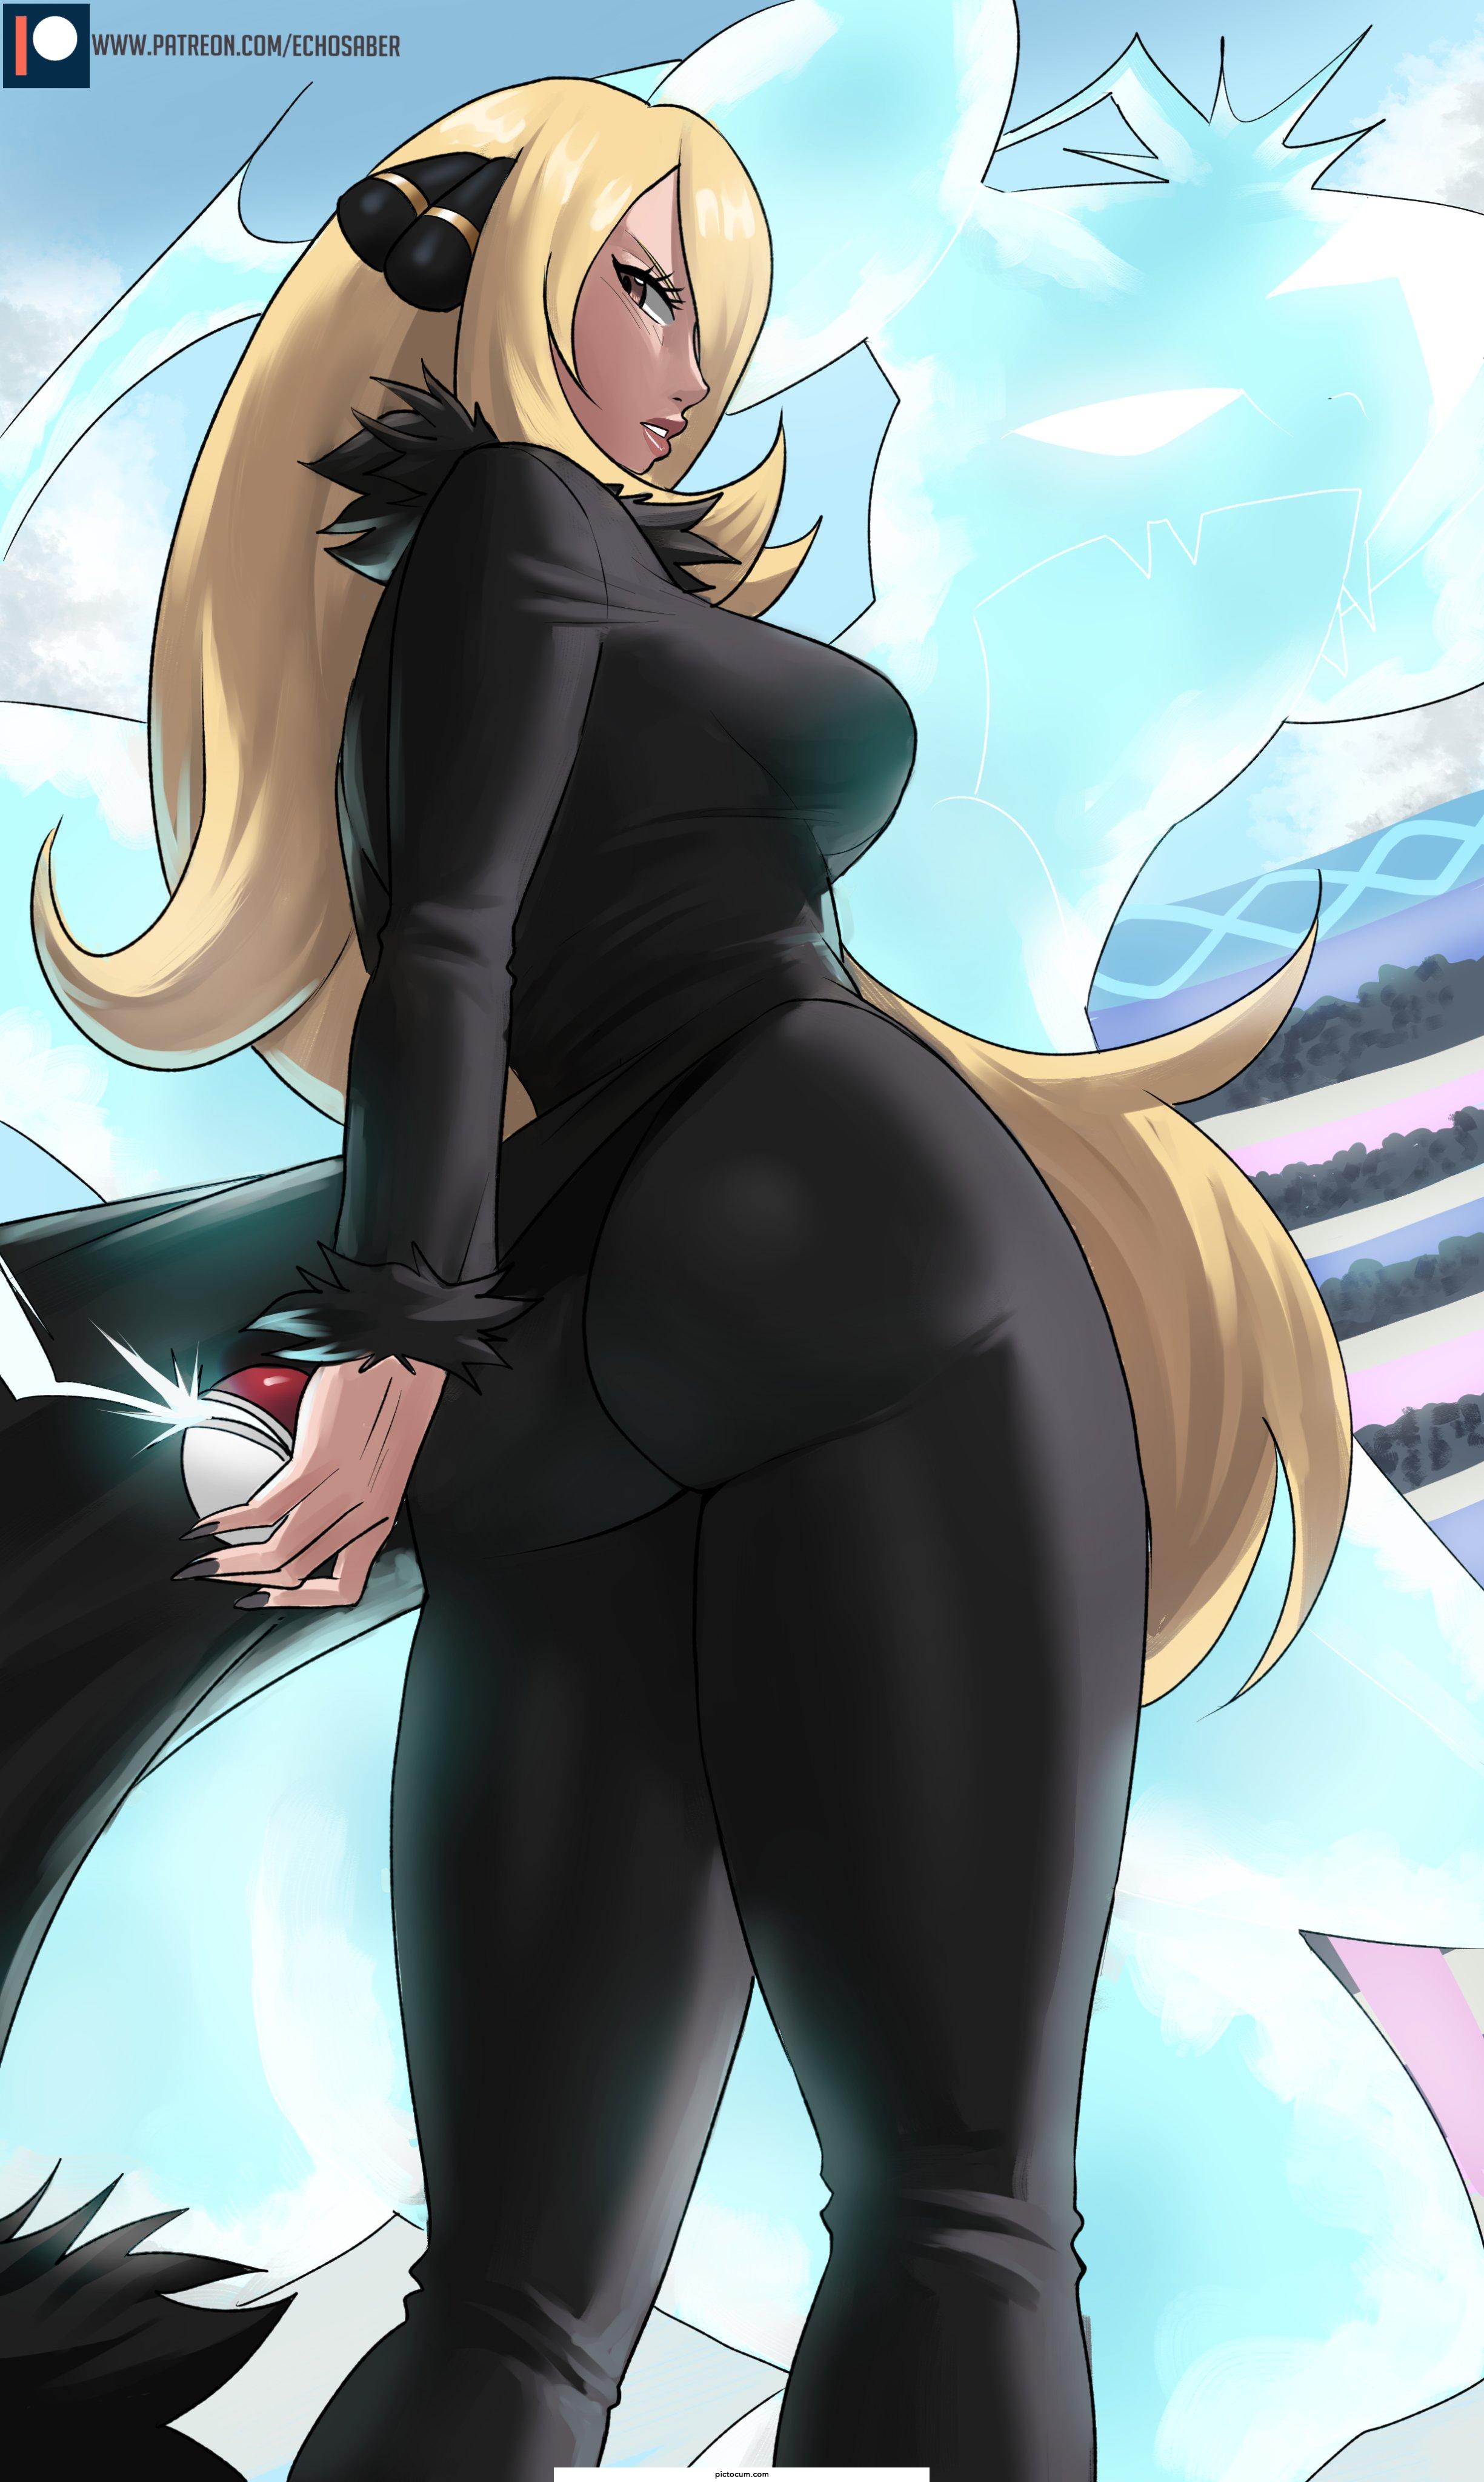 Cynthia is challenging you to Battle! 🍑💕